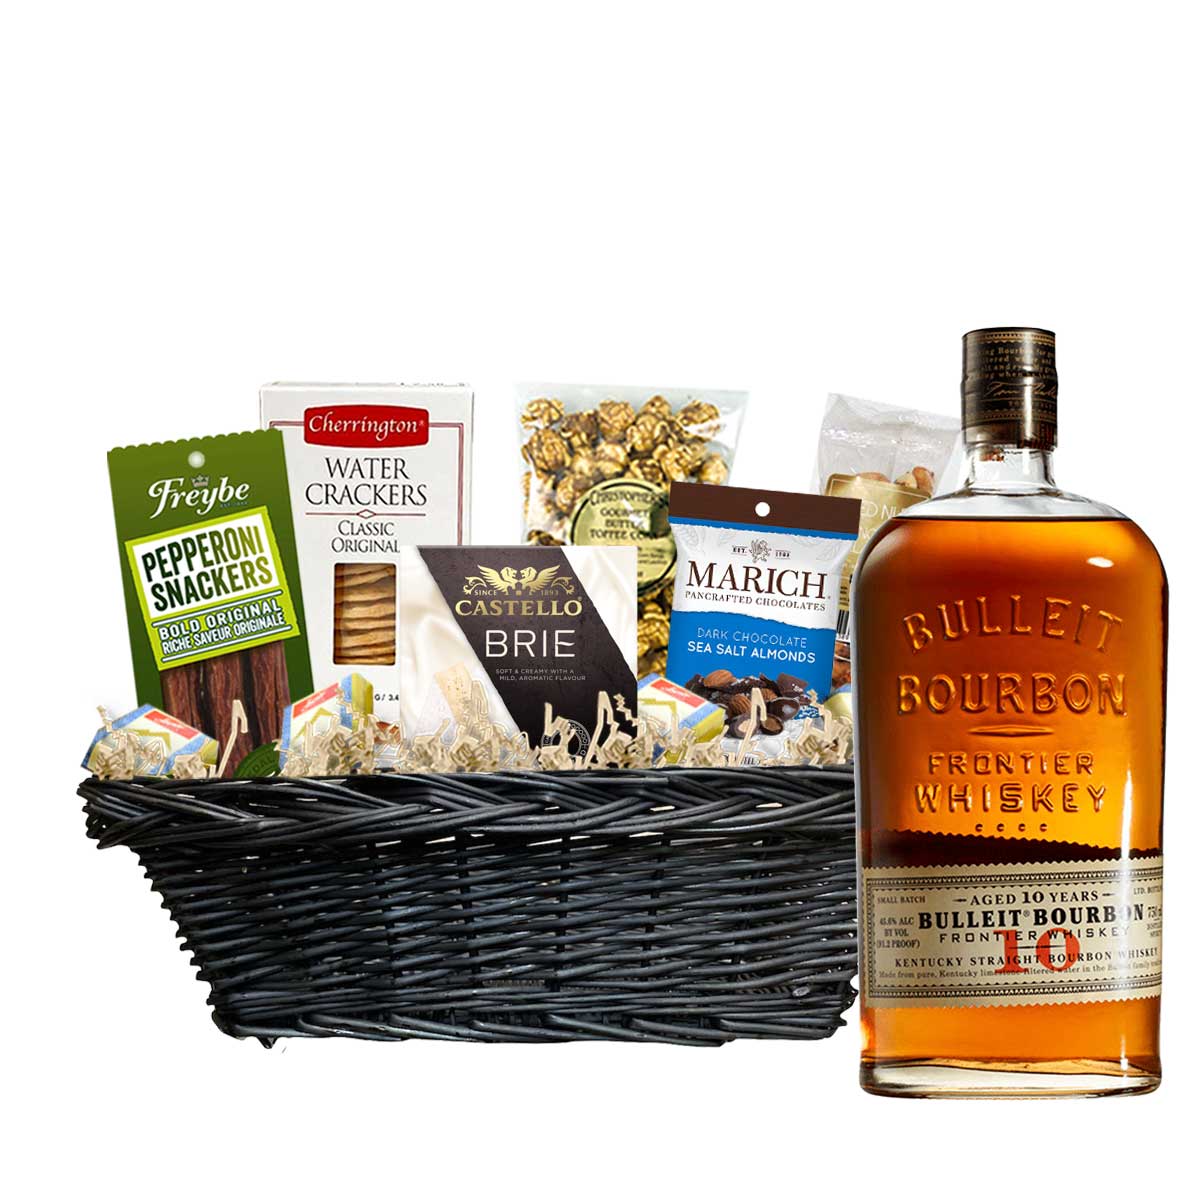 TAG Liquor Stores Canada Delivery-Bulleit 10 Year Bourbon 750ml Corporate Gift Basket-spirits-tagliquorstores.com